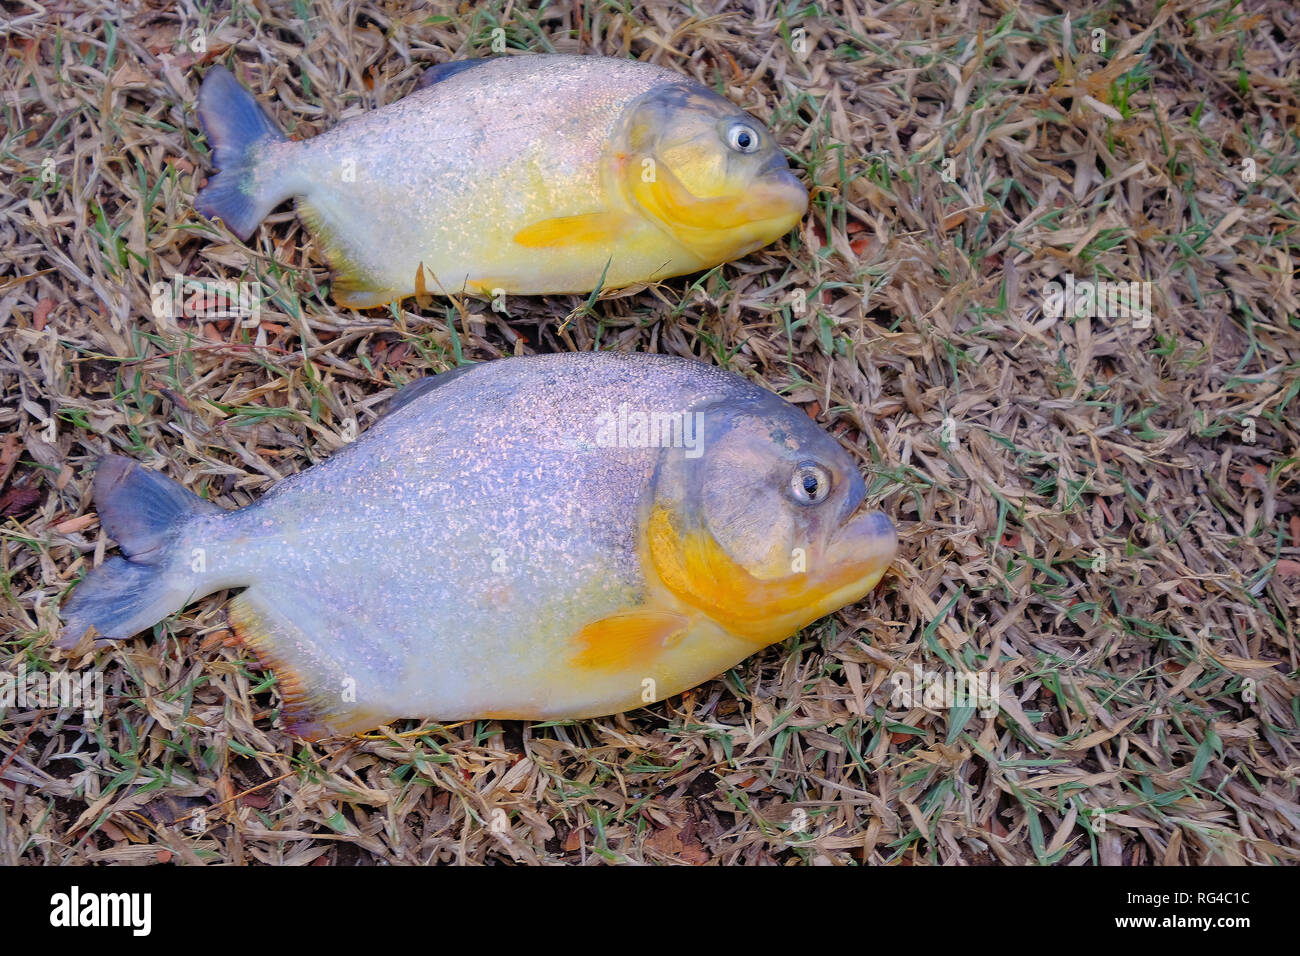 Two freshly caught piranhas fish with big teeth in Mato Grosso, Pantanal, Brazil Stock Photo